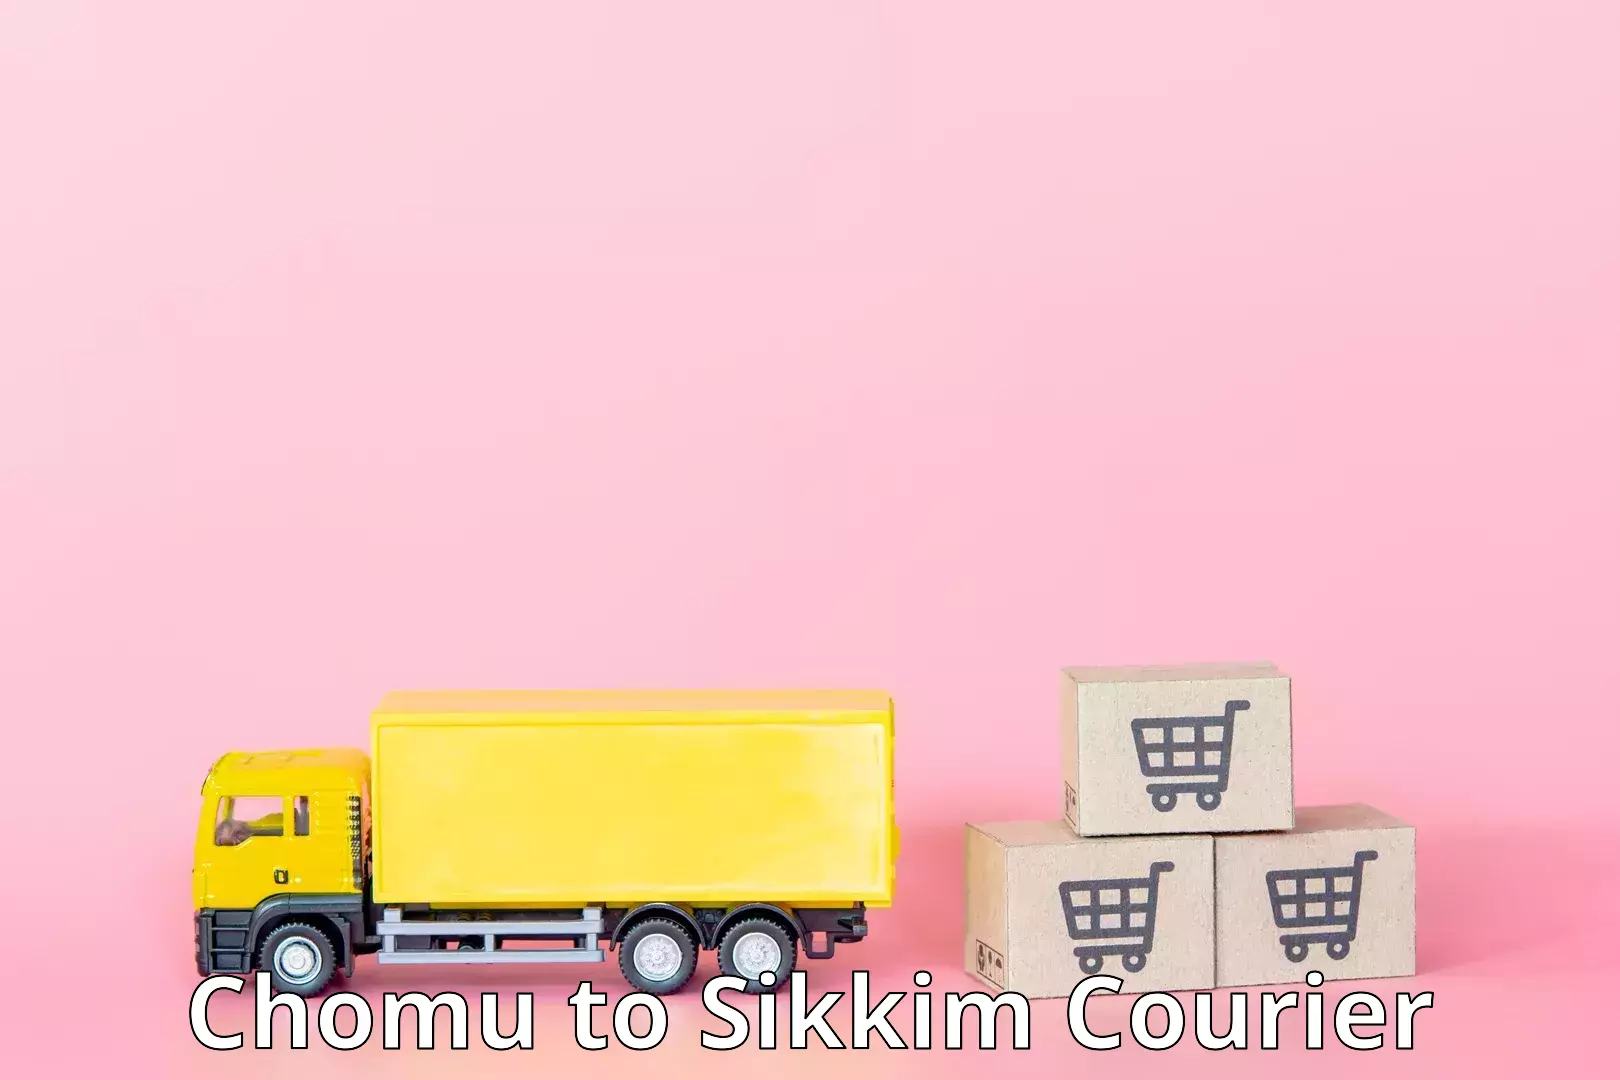 High-capacity parcel service Chomu to Sikkim